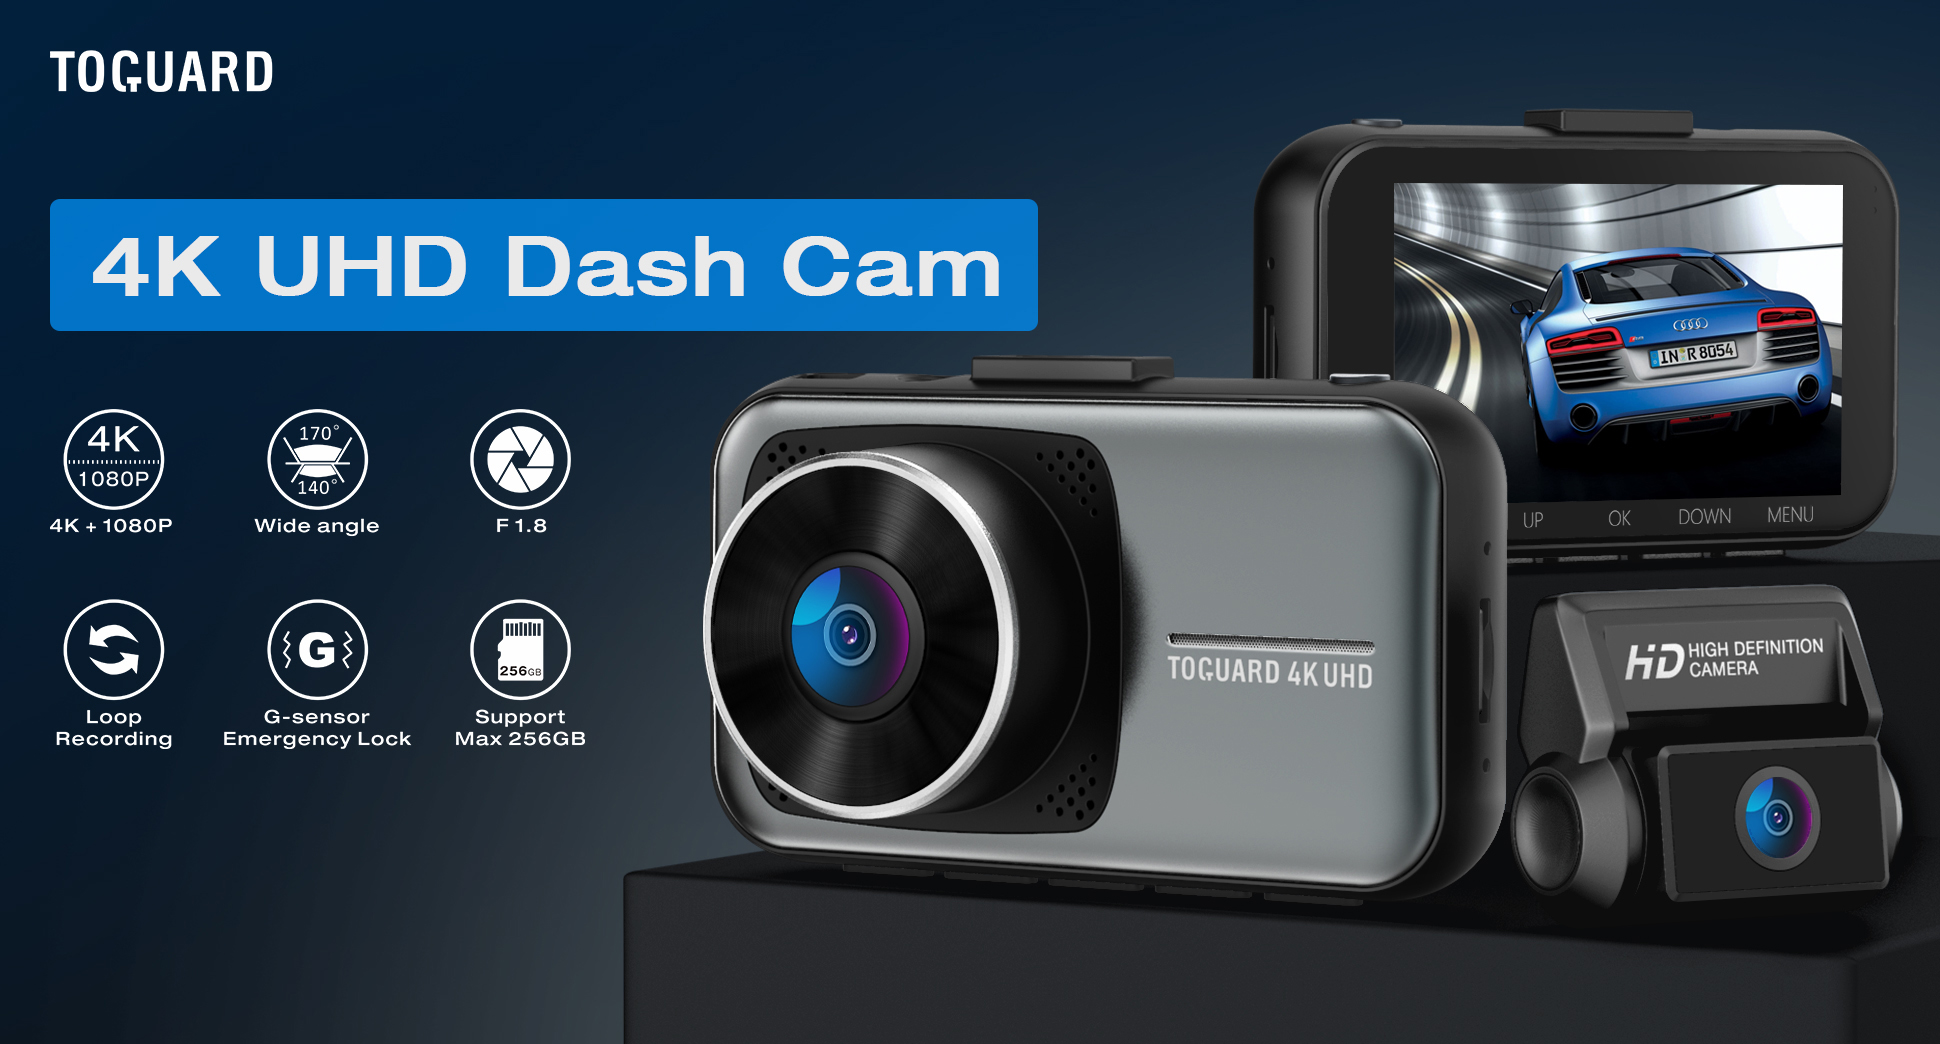 2160P & 1080P Front and Rear Dual Dash Camera 3 inch LCD Display Car Video Recording w/24H Parking Monitor TOGUARD 4K Dash Cam for Cars w/Hardwire Kit Night Vision G-Sensor Support 256GB SD Card 